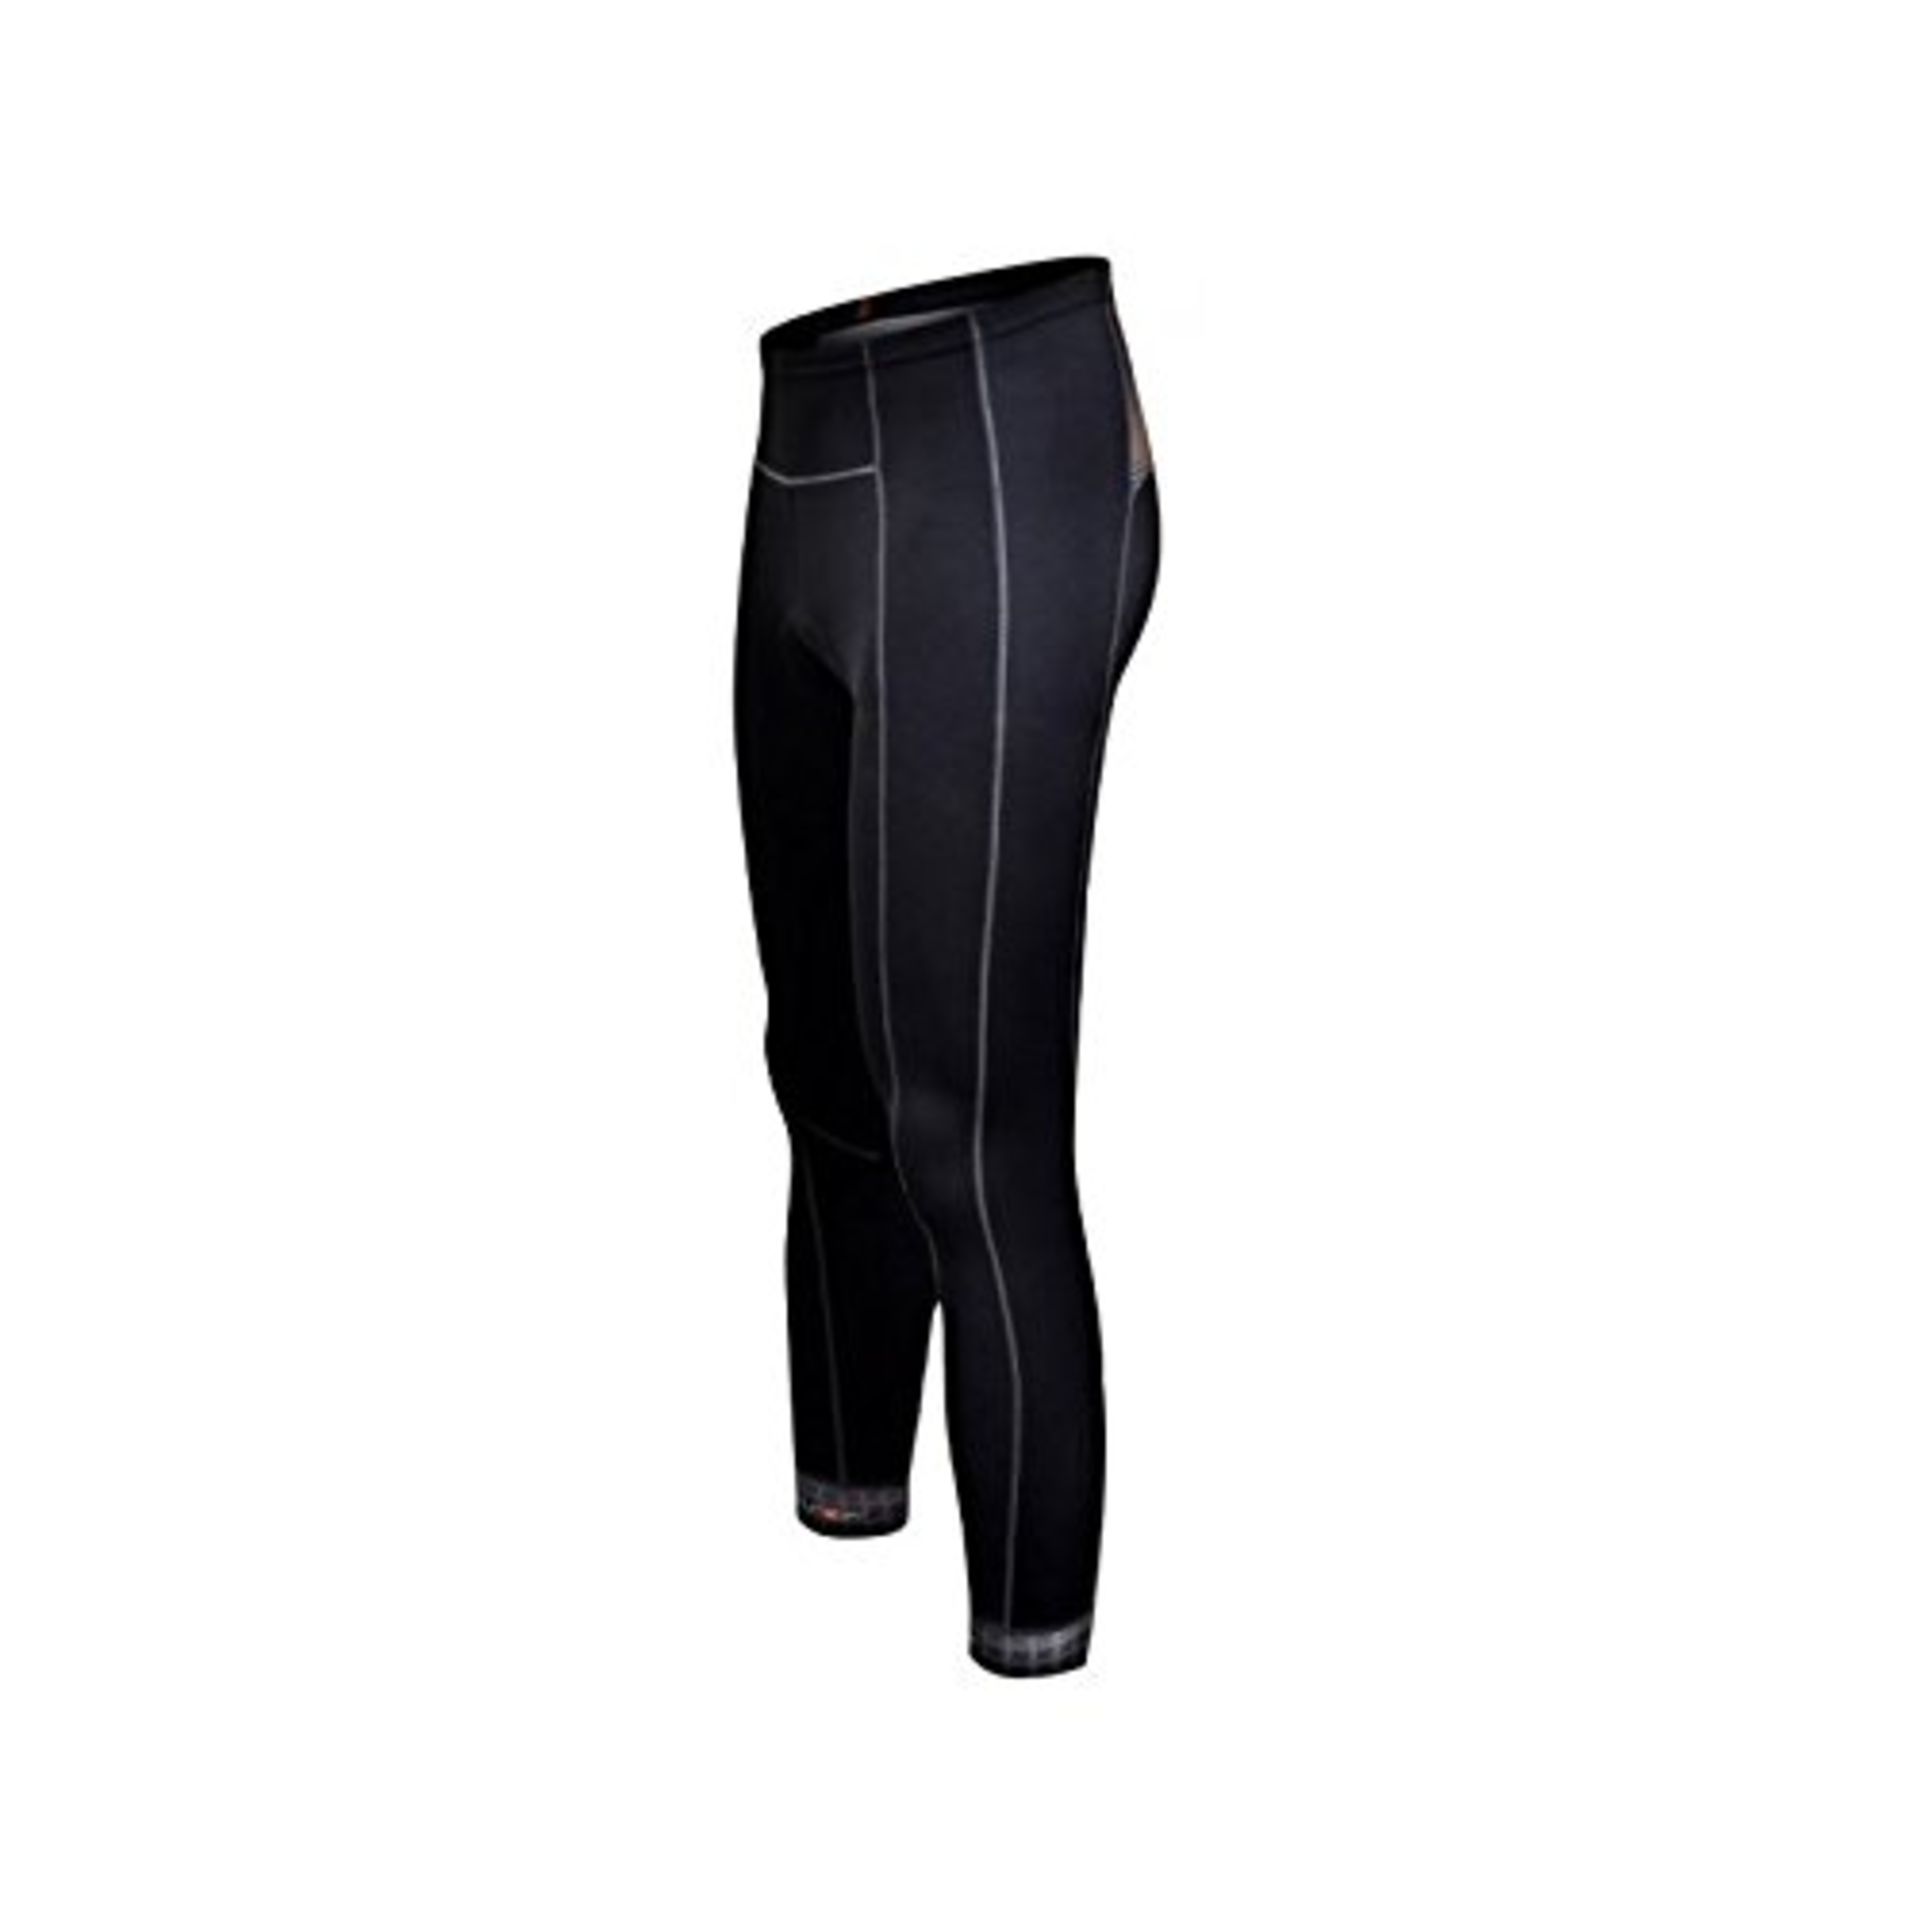 3 x Pairs of Women's Microfleece Thermal Tights | Total RRP £92.62 | See Description for Details - Bild 3 aus 3